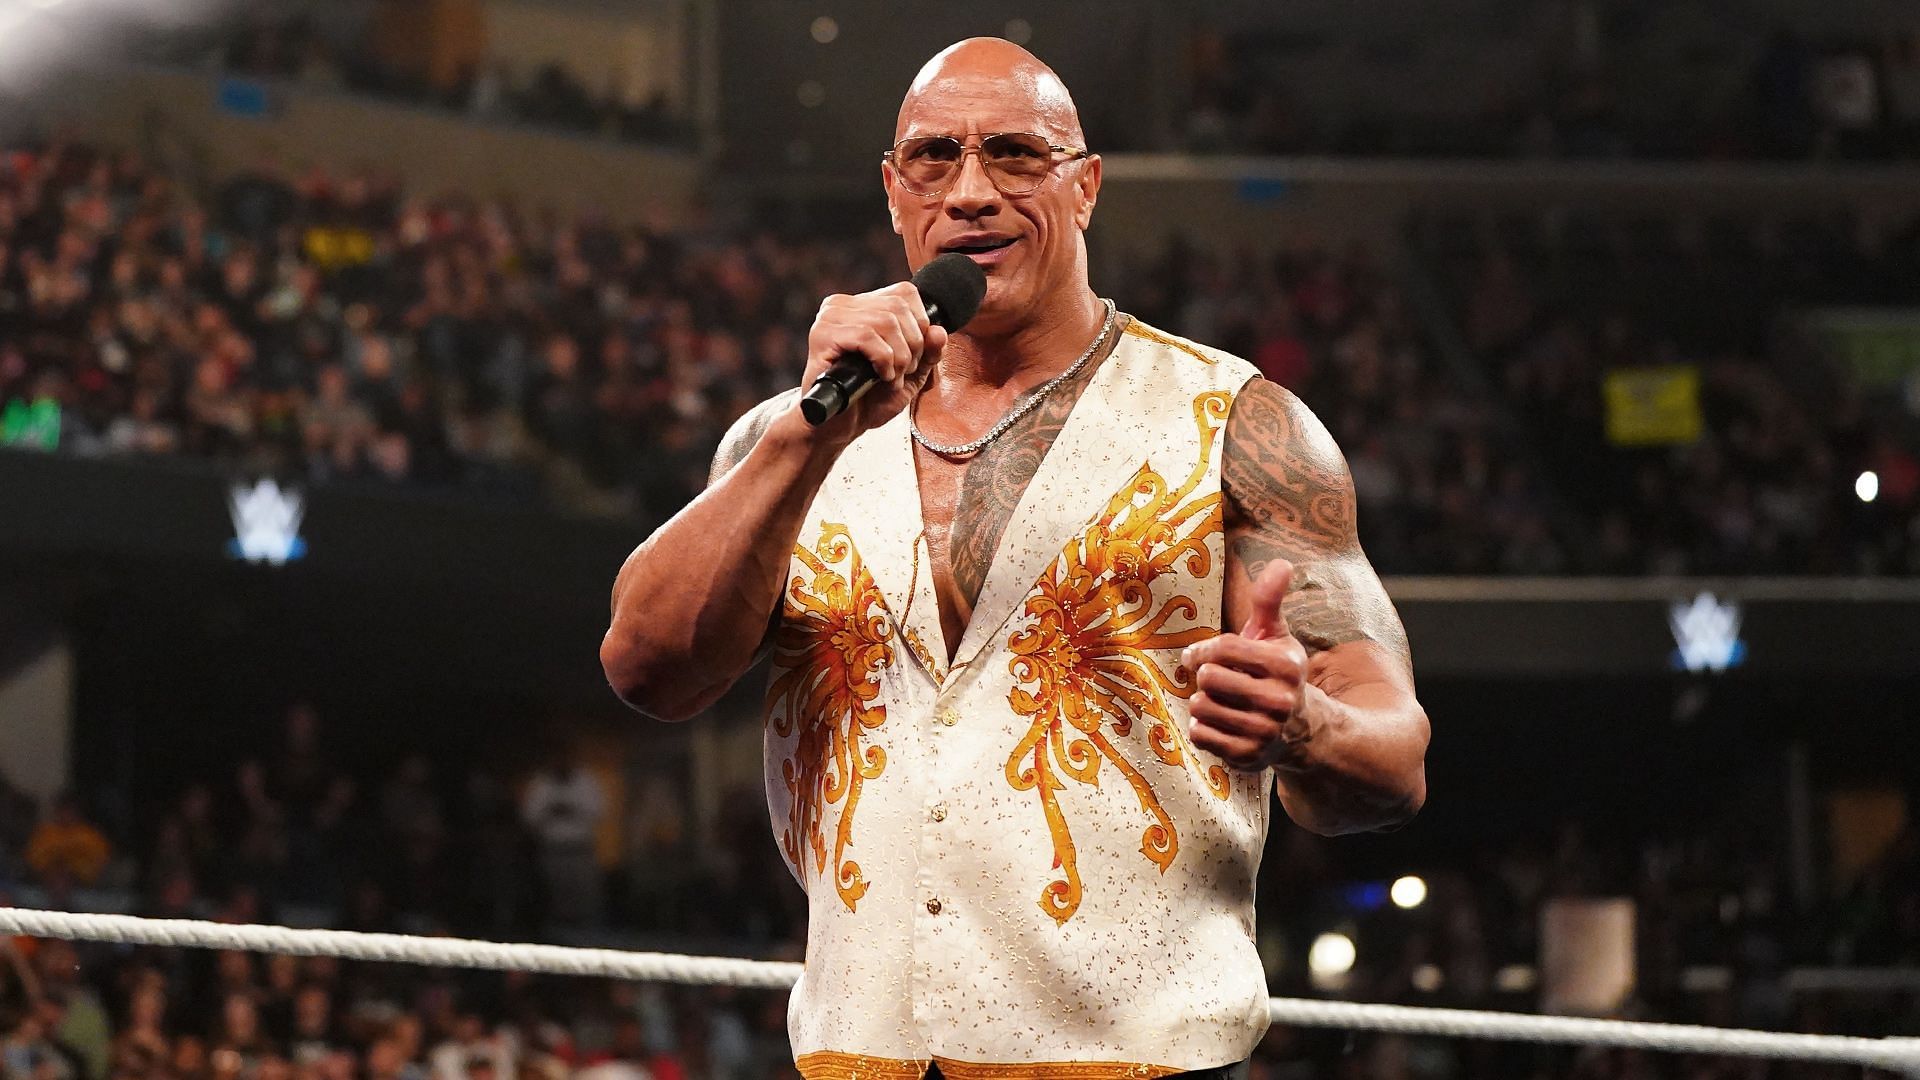 The Rock is advertised for the April1 edition of RAW